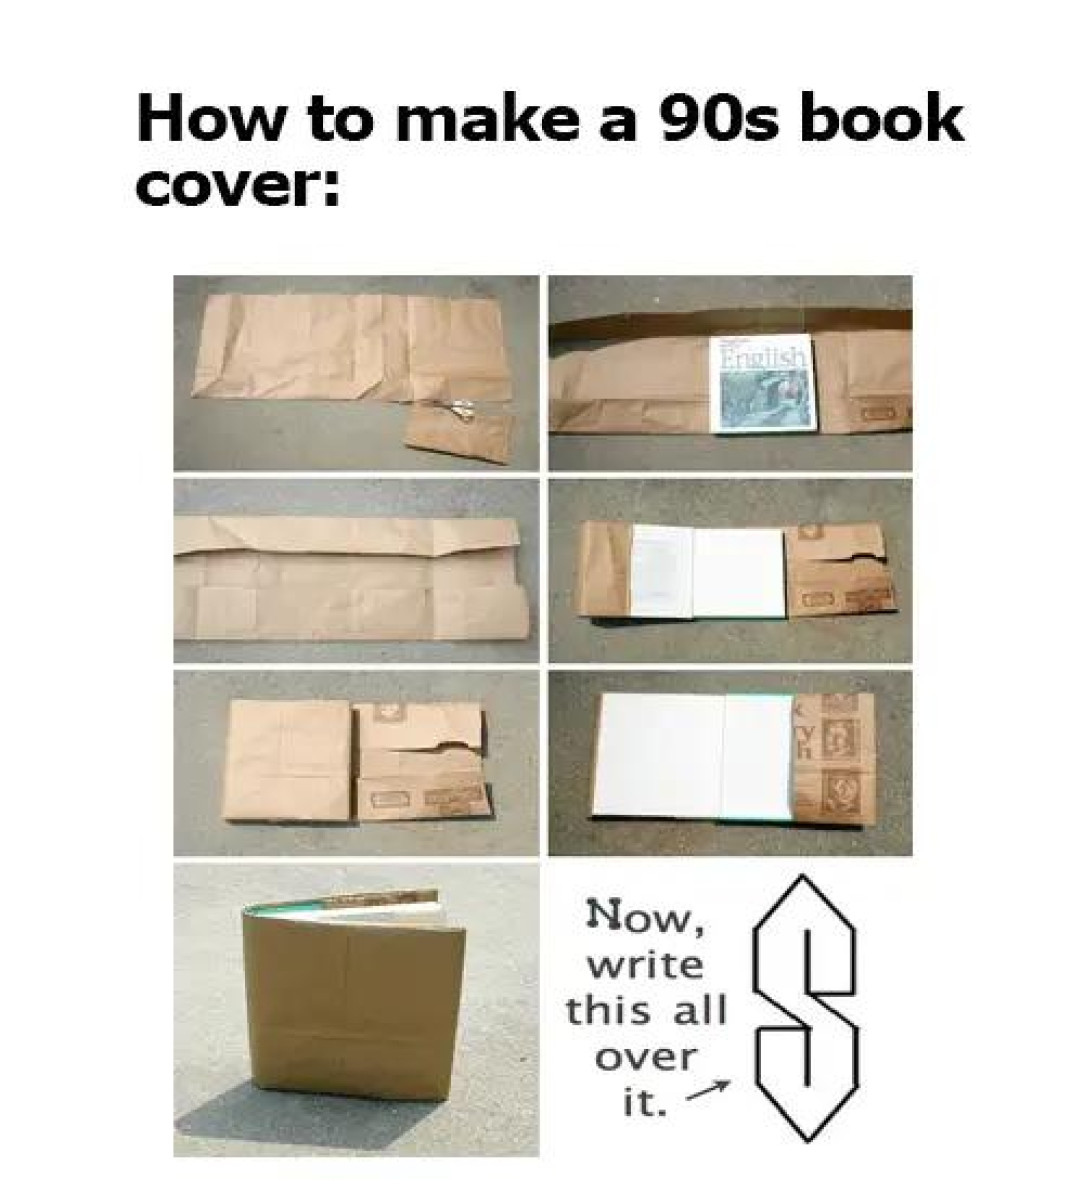 How to make the paper book covers from elementary school